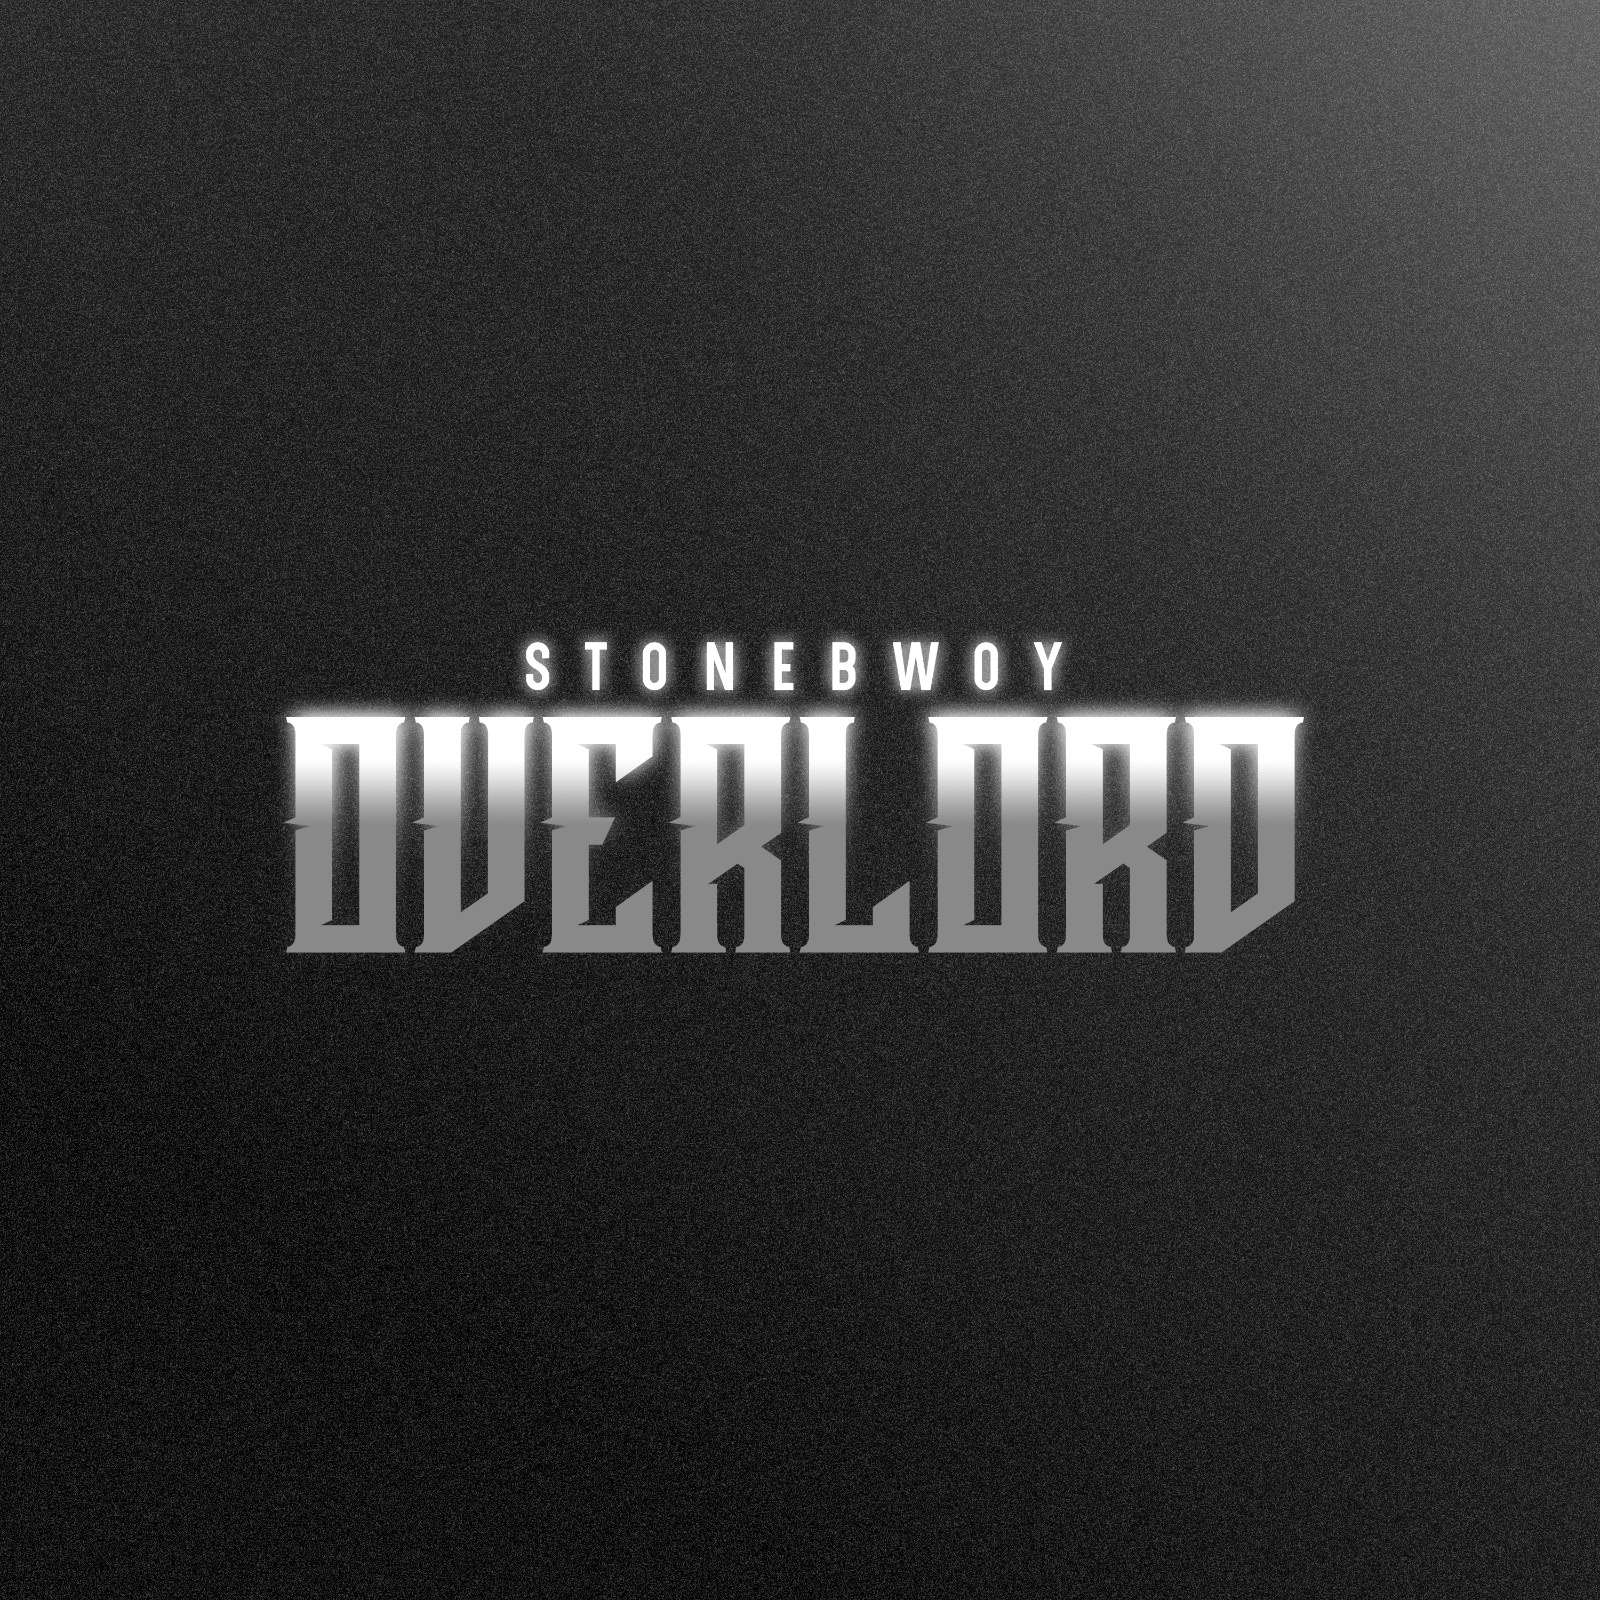 Download Stonebwoy-Overlord-Ghflamez.com-mp3-image